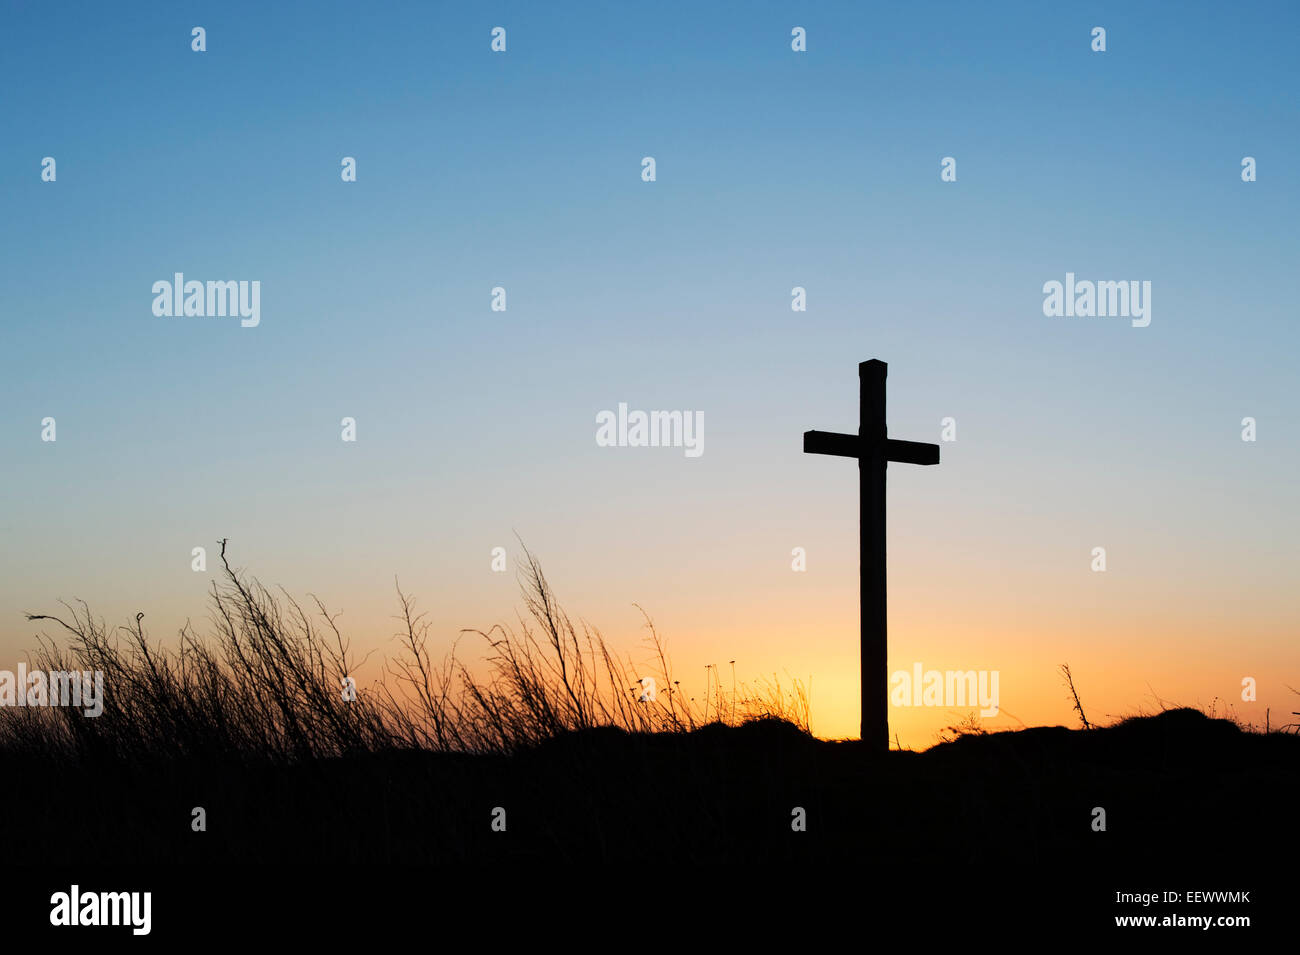 St Cuthbert's Isle wooden cross on Holy Island, Lindisfarne at sunrise. Northumberland, England. Silhouette Stock Photo